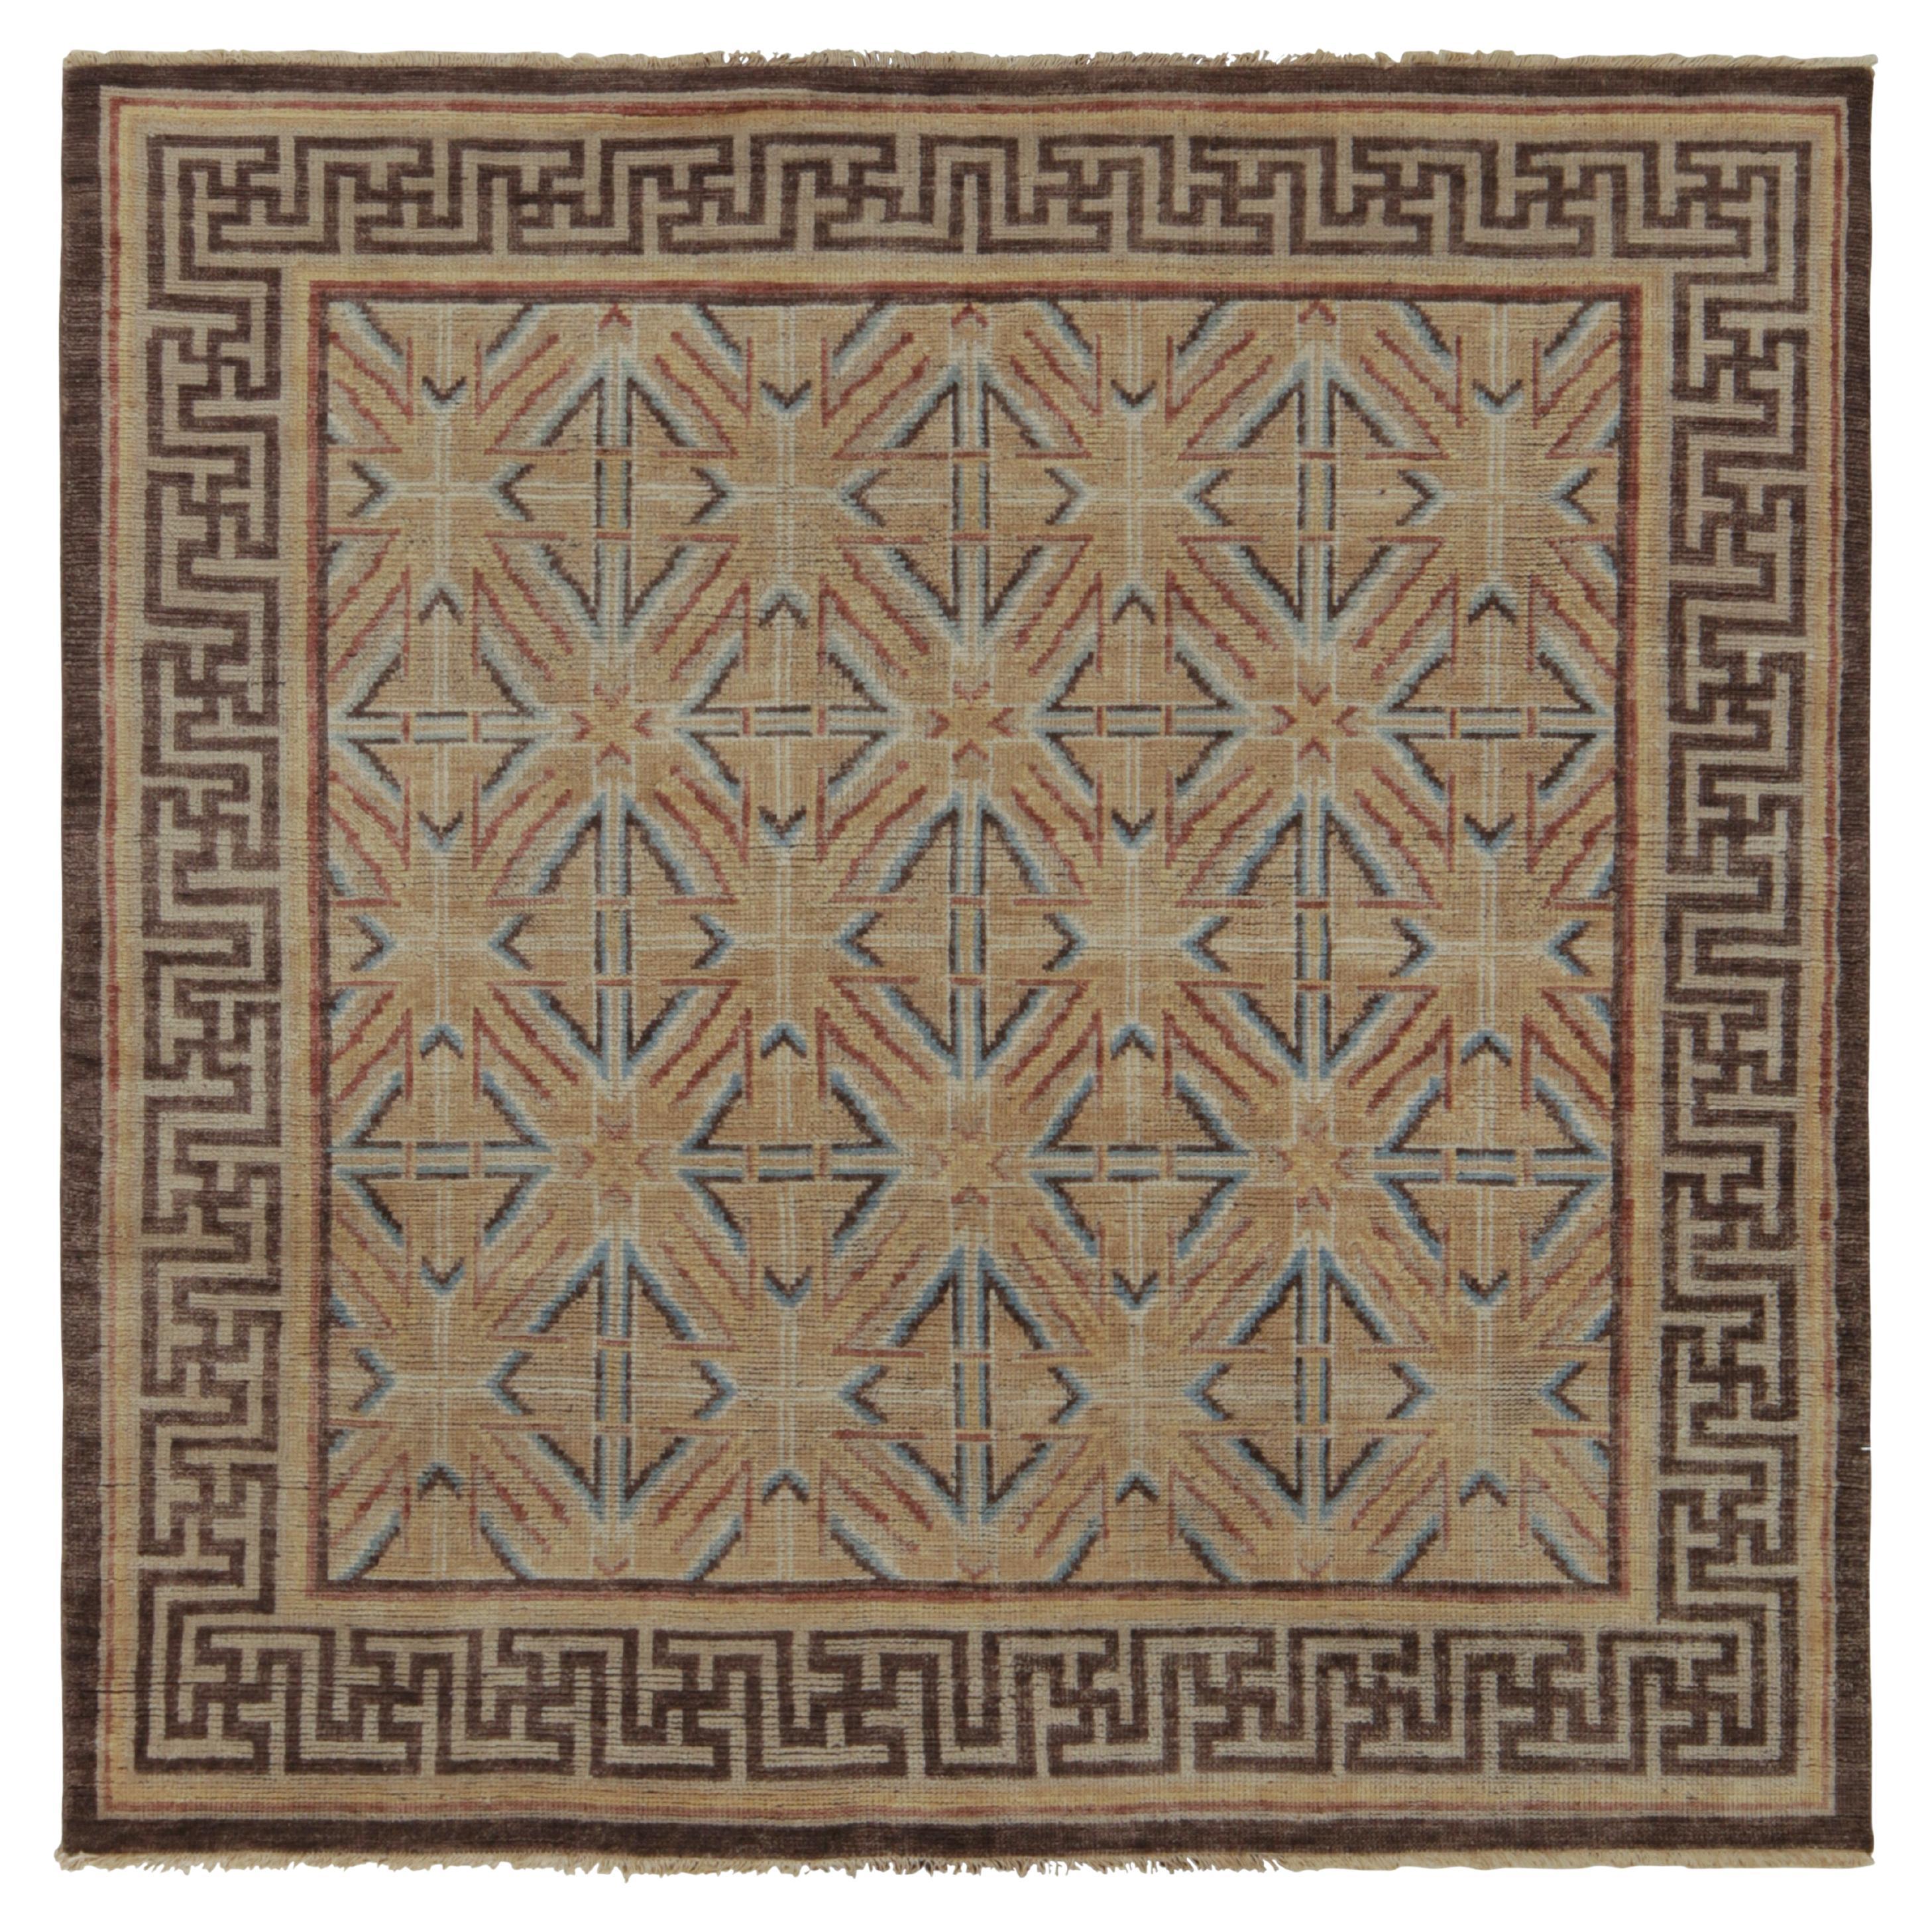 Rug & Kilim’s Chinese Dynastic Style Square Rug in Beige-Brown and Blue Patterns